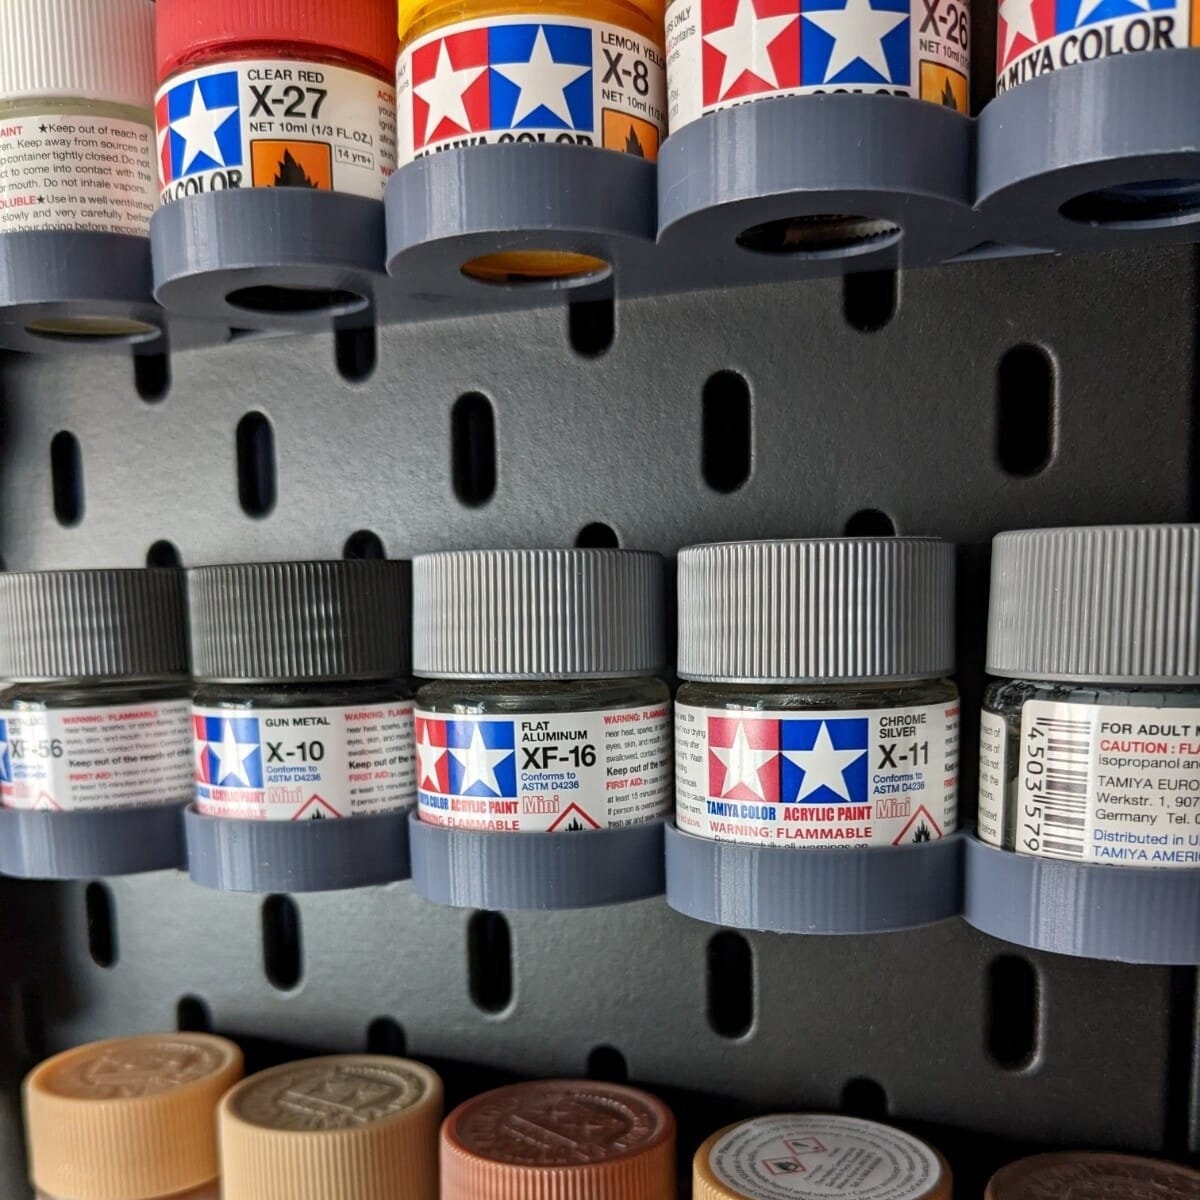 Paint Rack - 36mm Polly Scale / Tamiya 10ml and Larger Craft